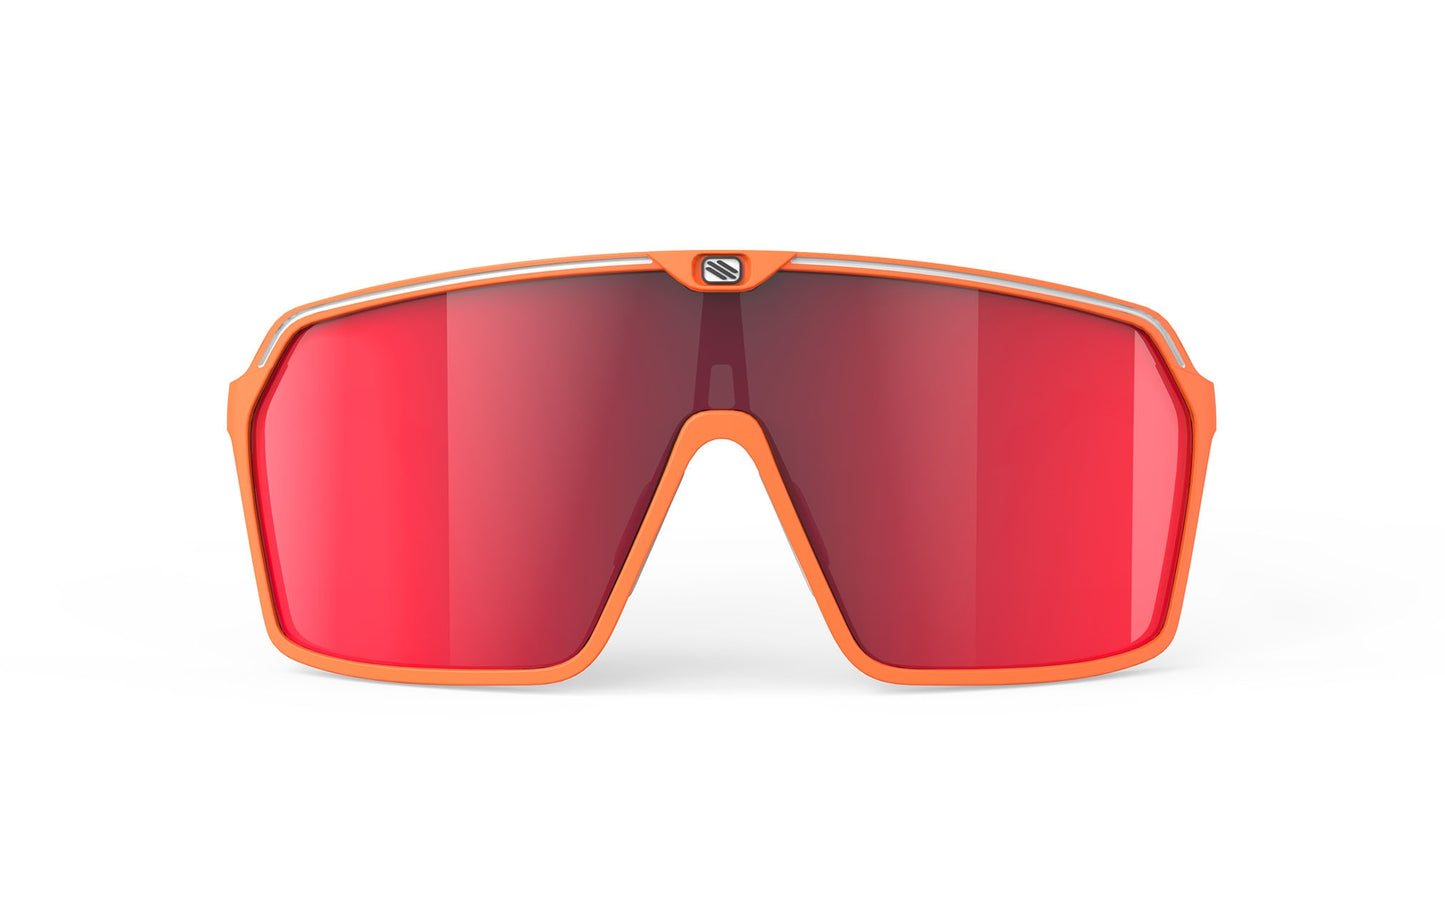 Load image into Gallery viewer, Rudy Project Spinshield Mandarin Fade / Coral Matte - Rp Optics Multilaser Red Sunglasses
